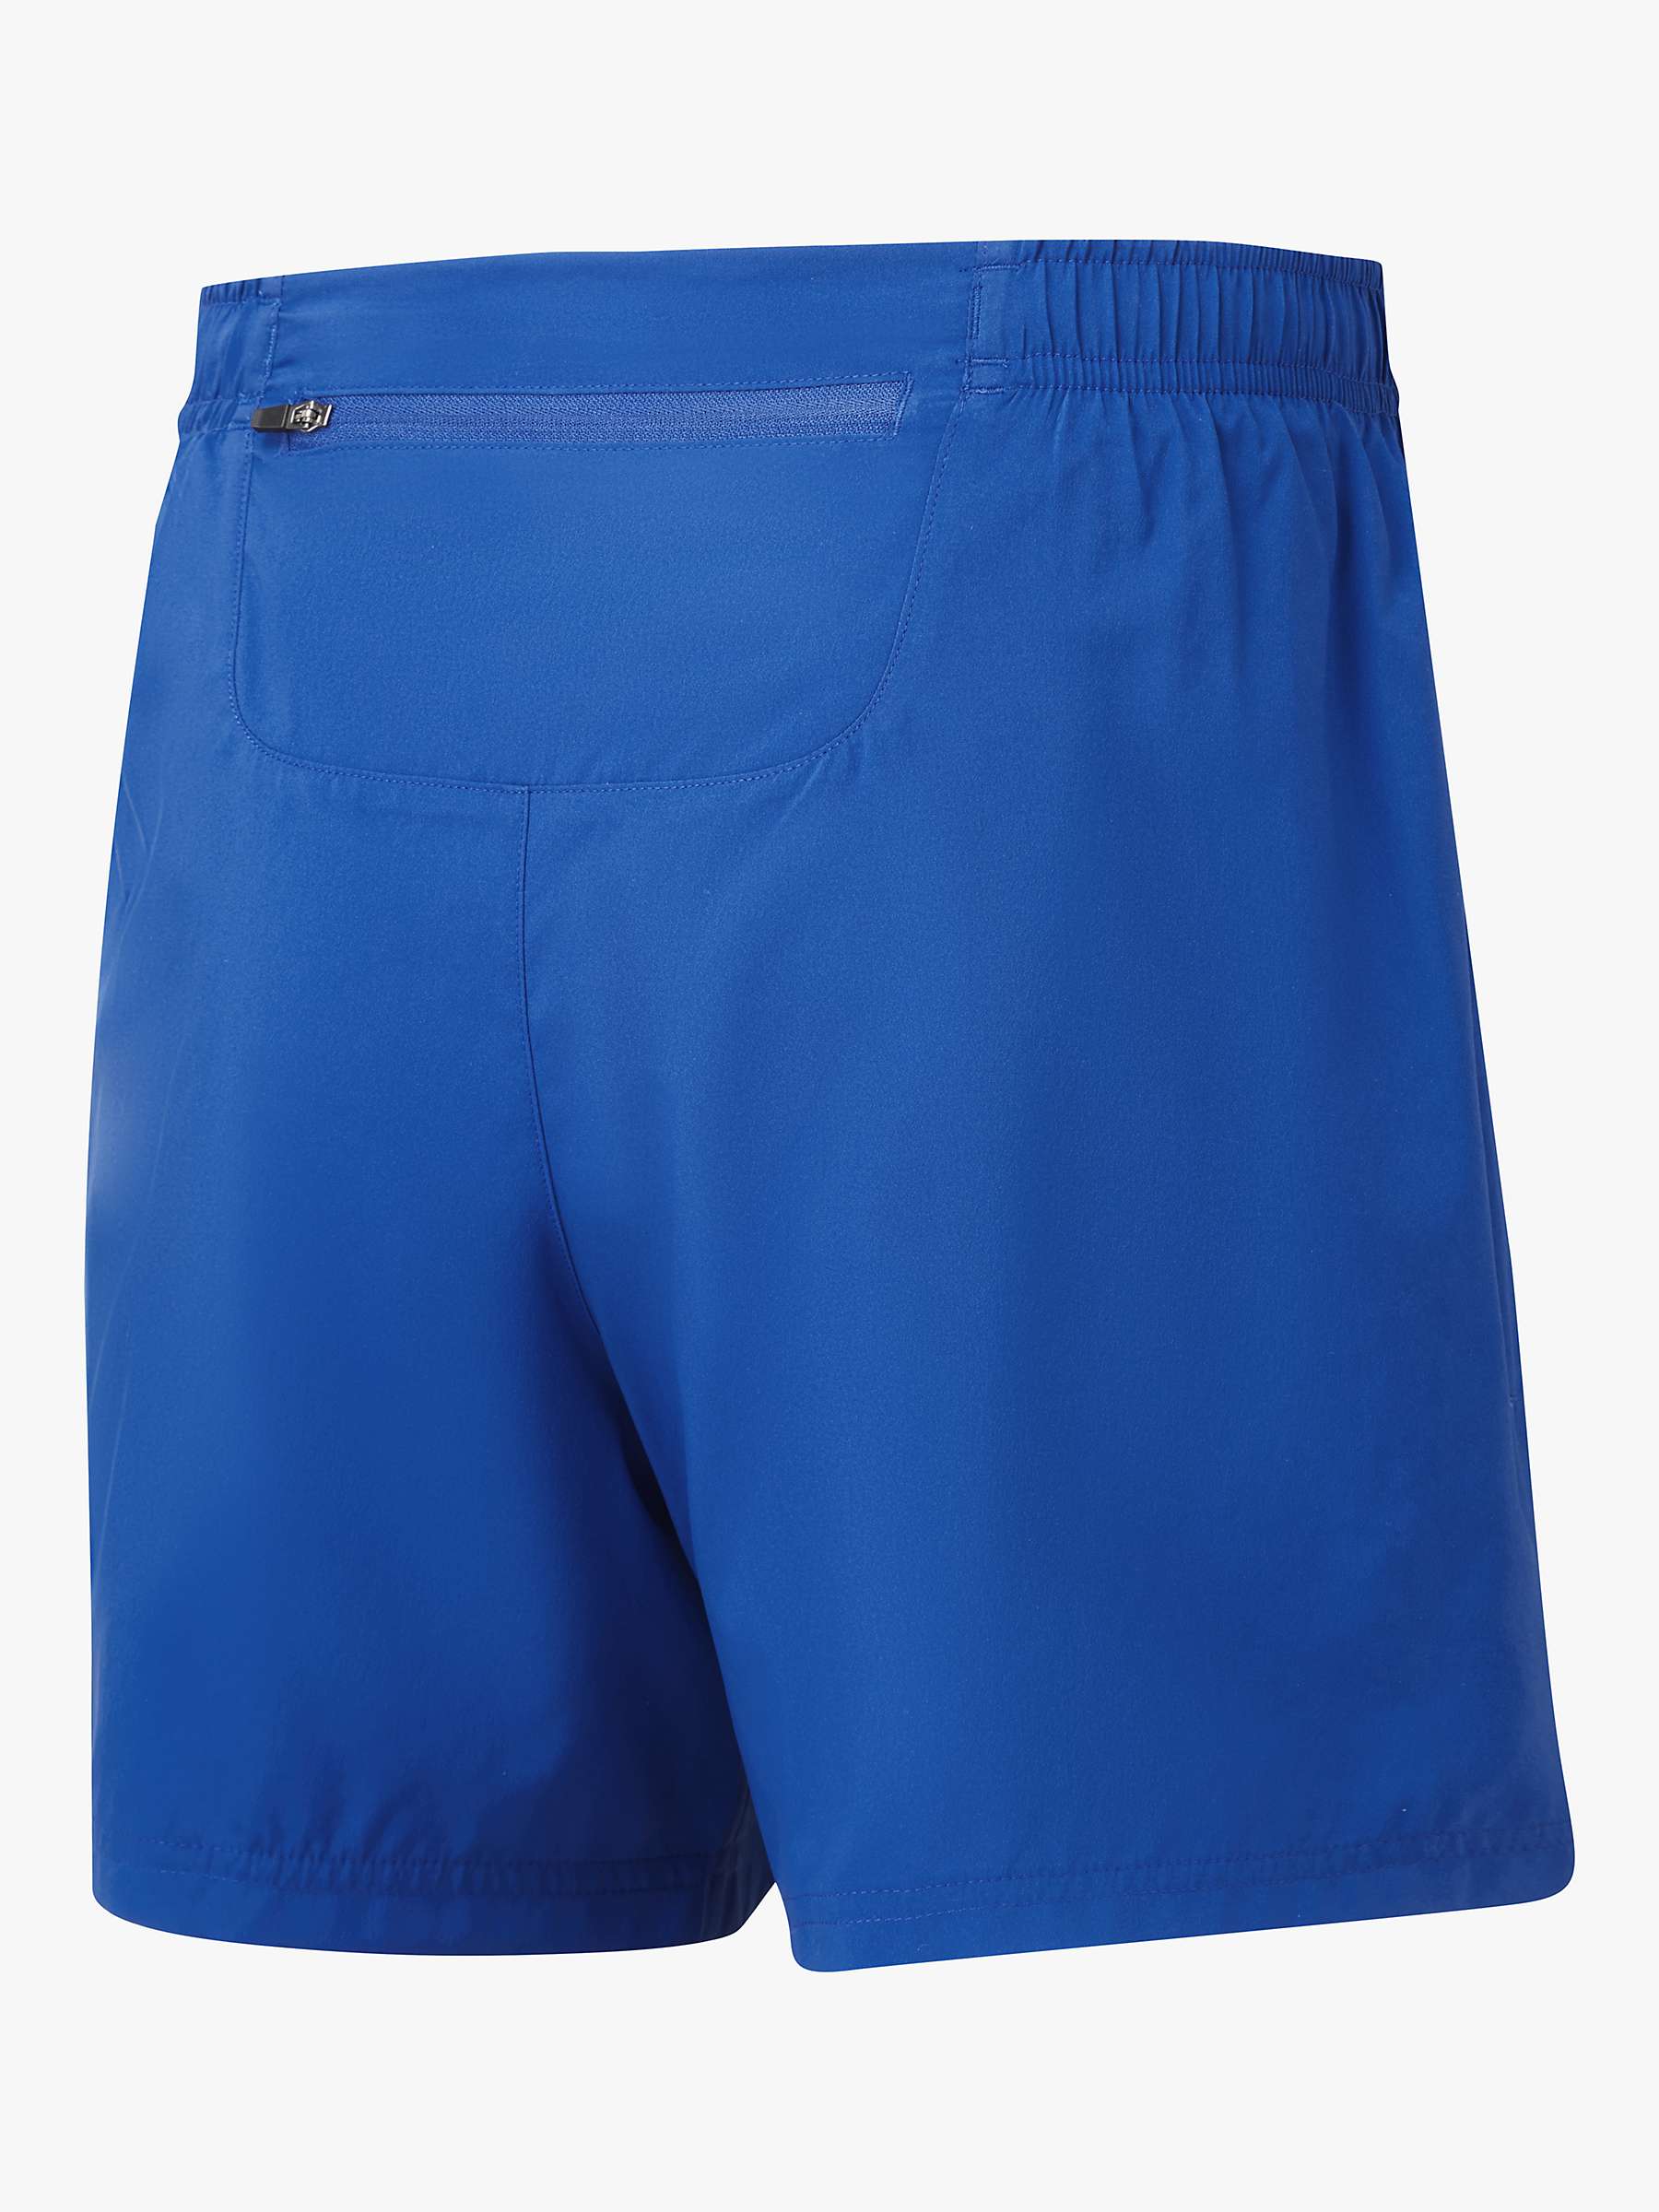 Buy Ronhill Relaxed 5 inch Shorts, Blue Online at johnlewis.com